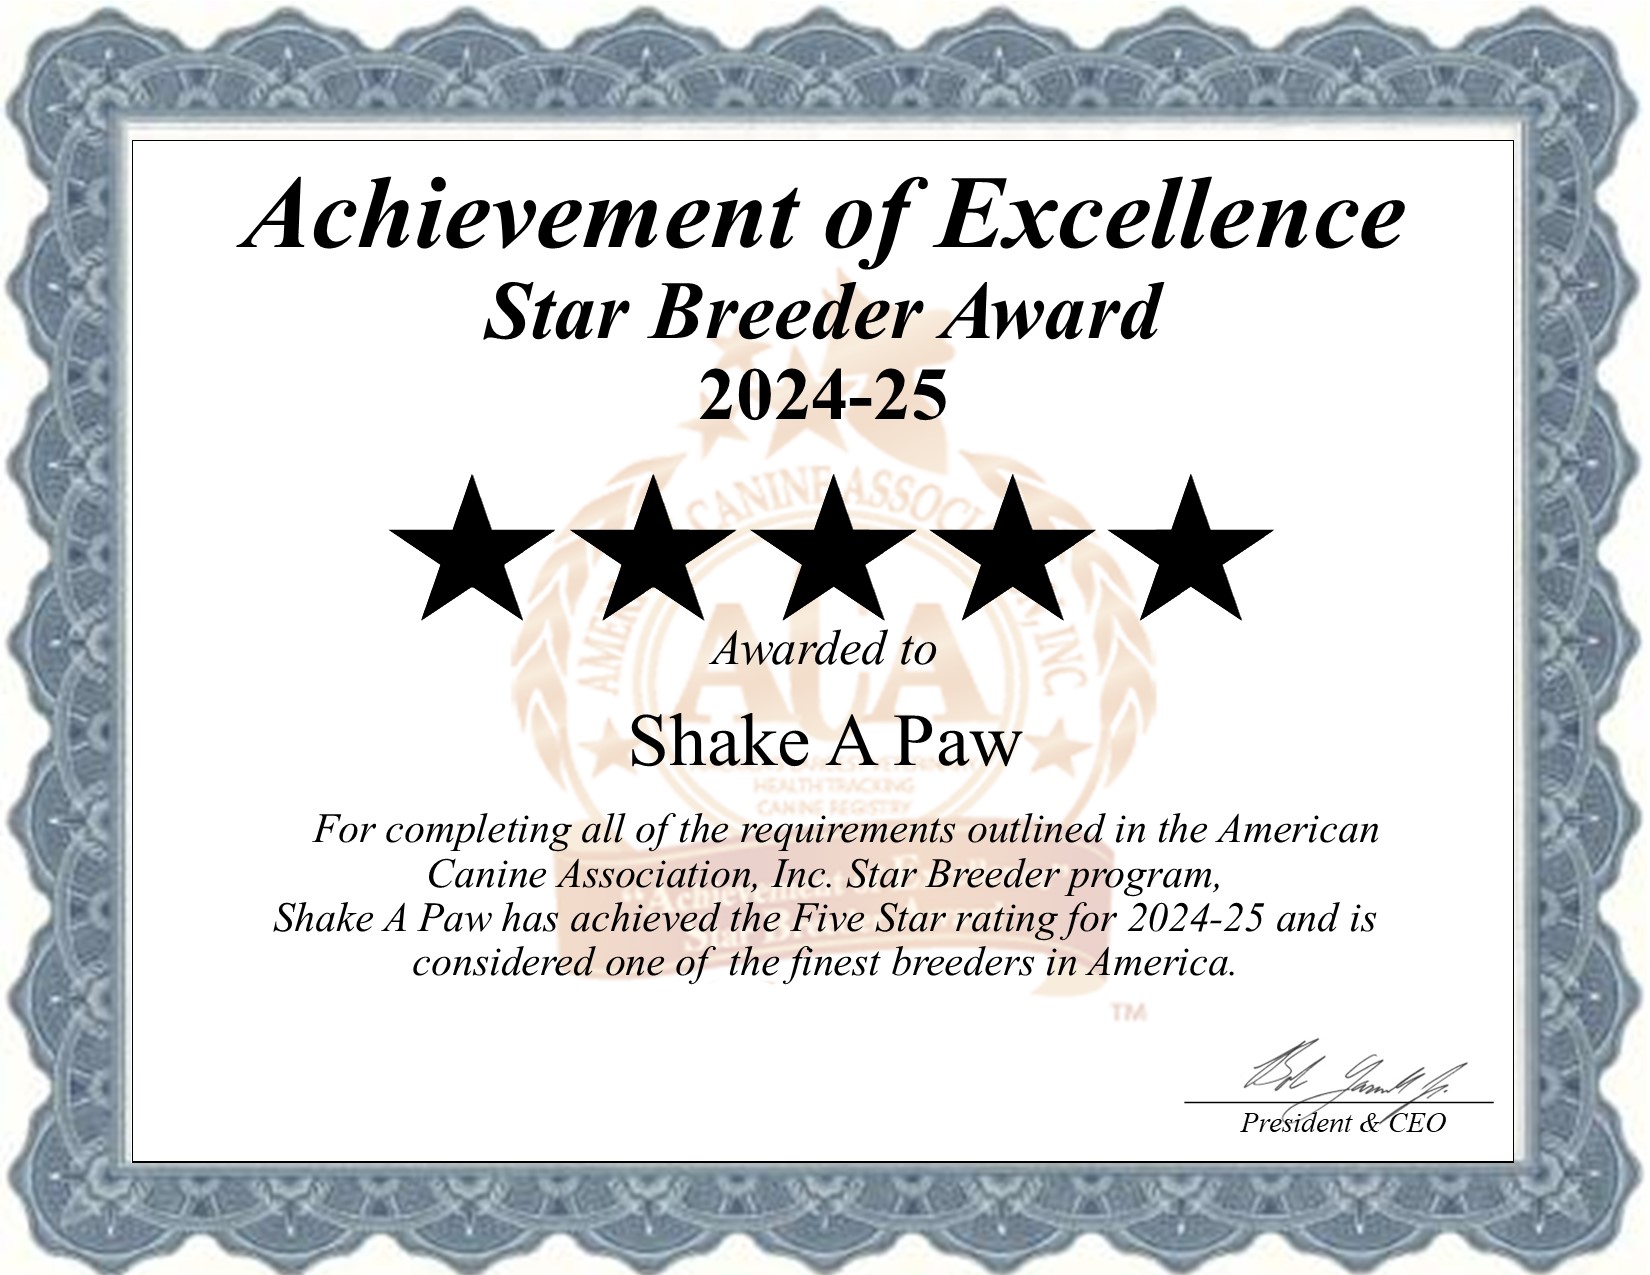 Shake A , Paw, dog, breeder, star, certificate, Shake A -Paw, Union. NJ, New Jersey, puppy, dog, kennels, mill, puppymill, usda, 5-star, aca, ica, registered, Yorkshire Terrier